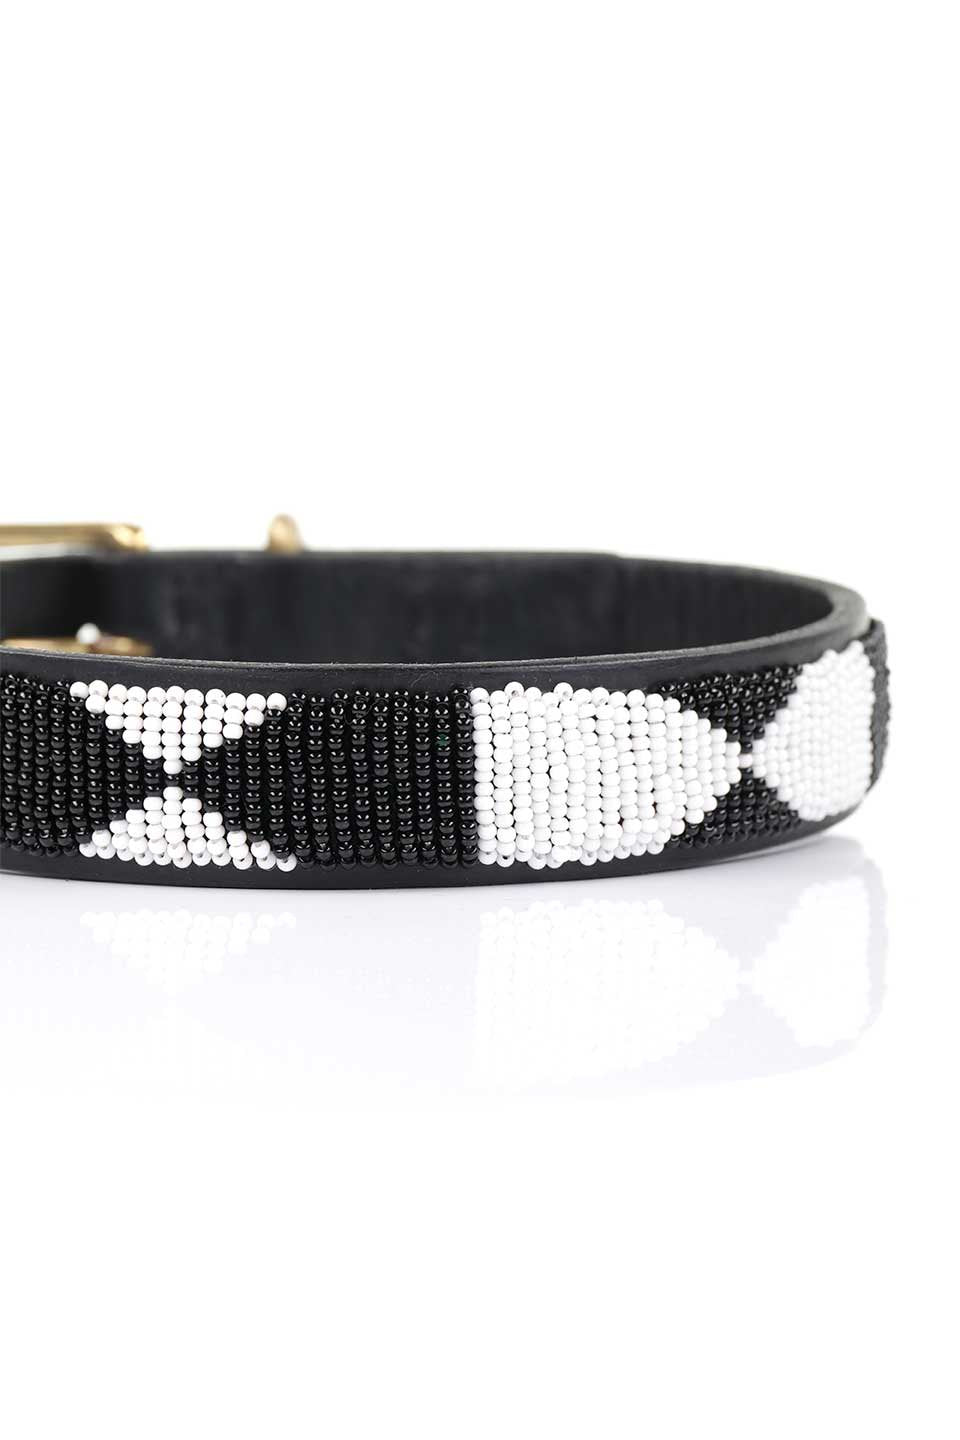 Evony&Ivory Beaded Dog Collar 16" エボニー＆アイボリー・ビーズドッグカラー / by THE KENYAN COLLECTION